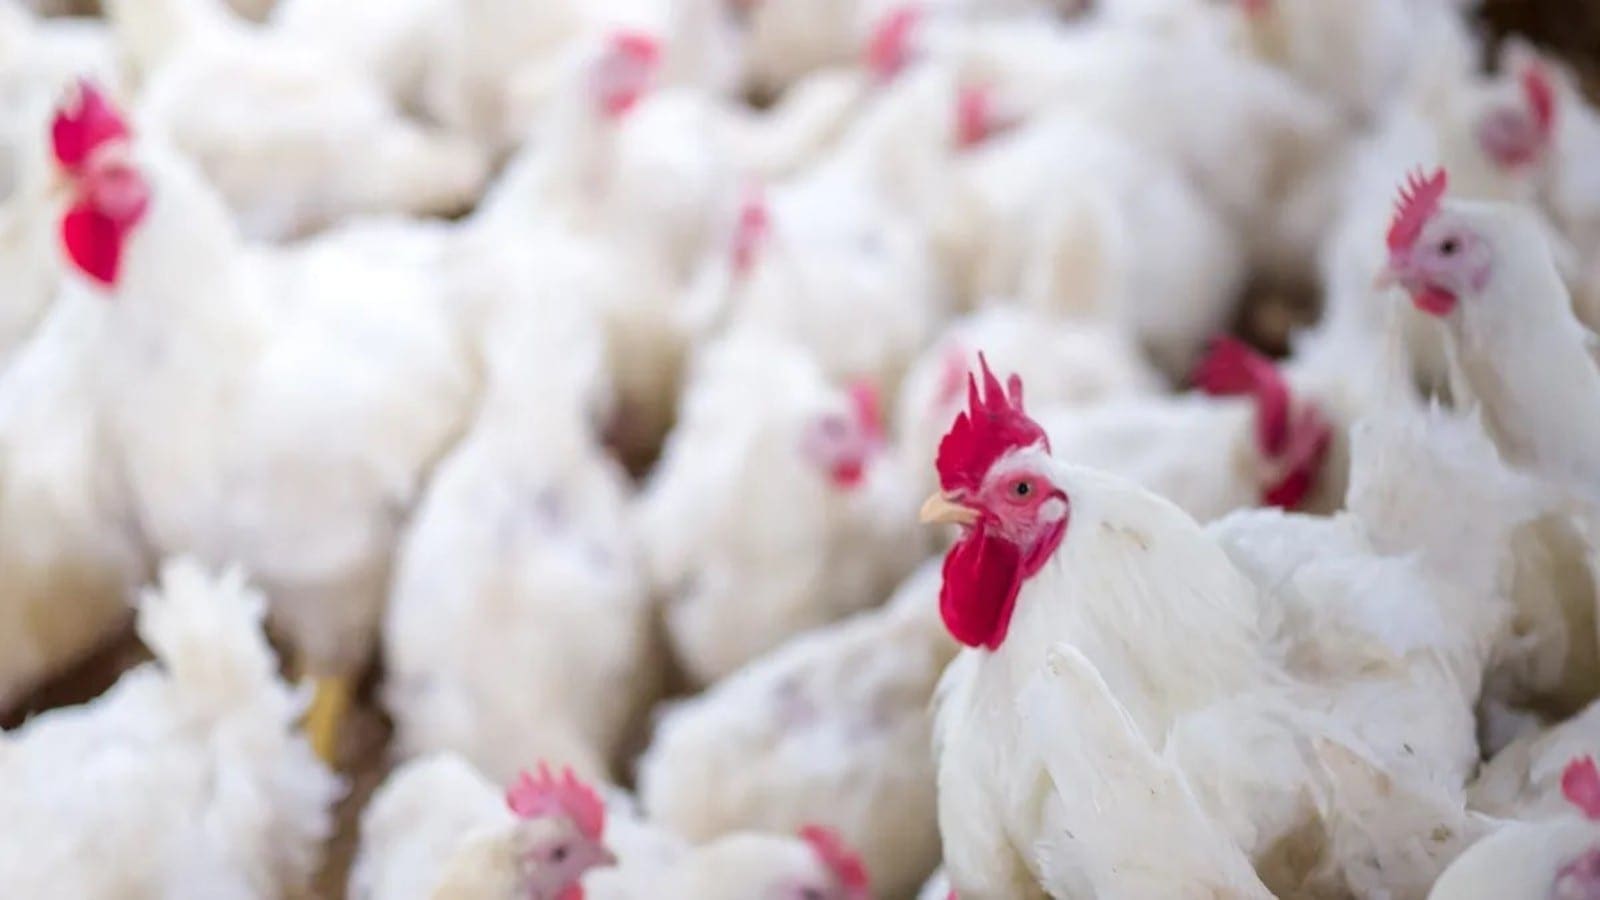 Cargill, Continental Grain to acquire US poultry producer Sanderson Farms for US$4.53bn